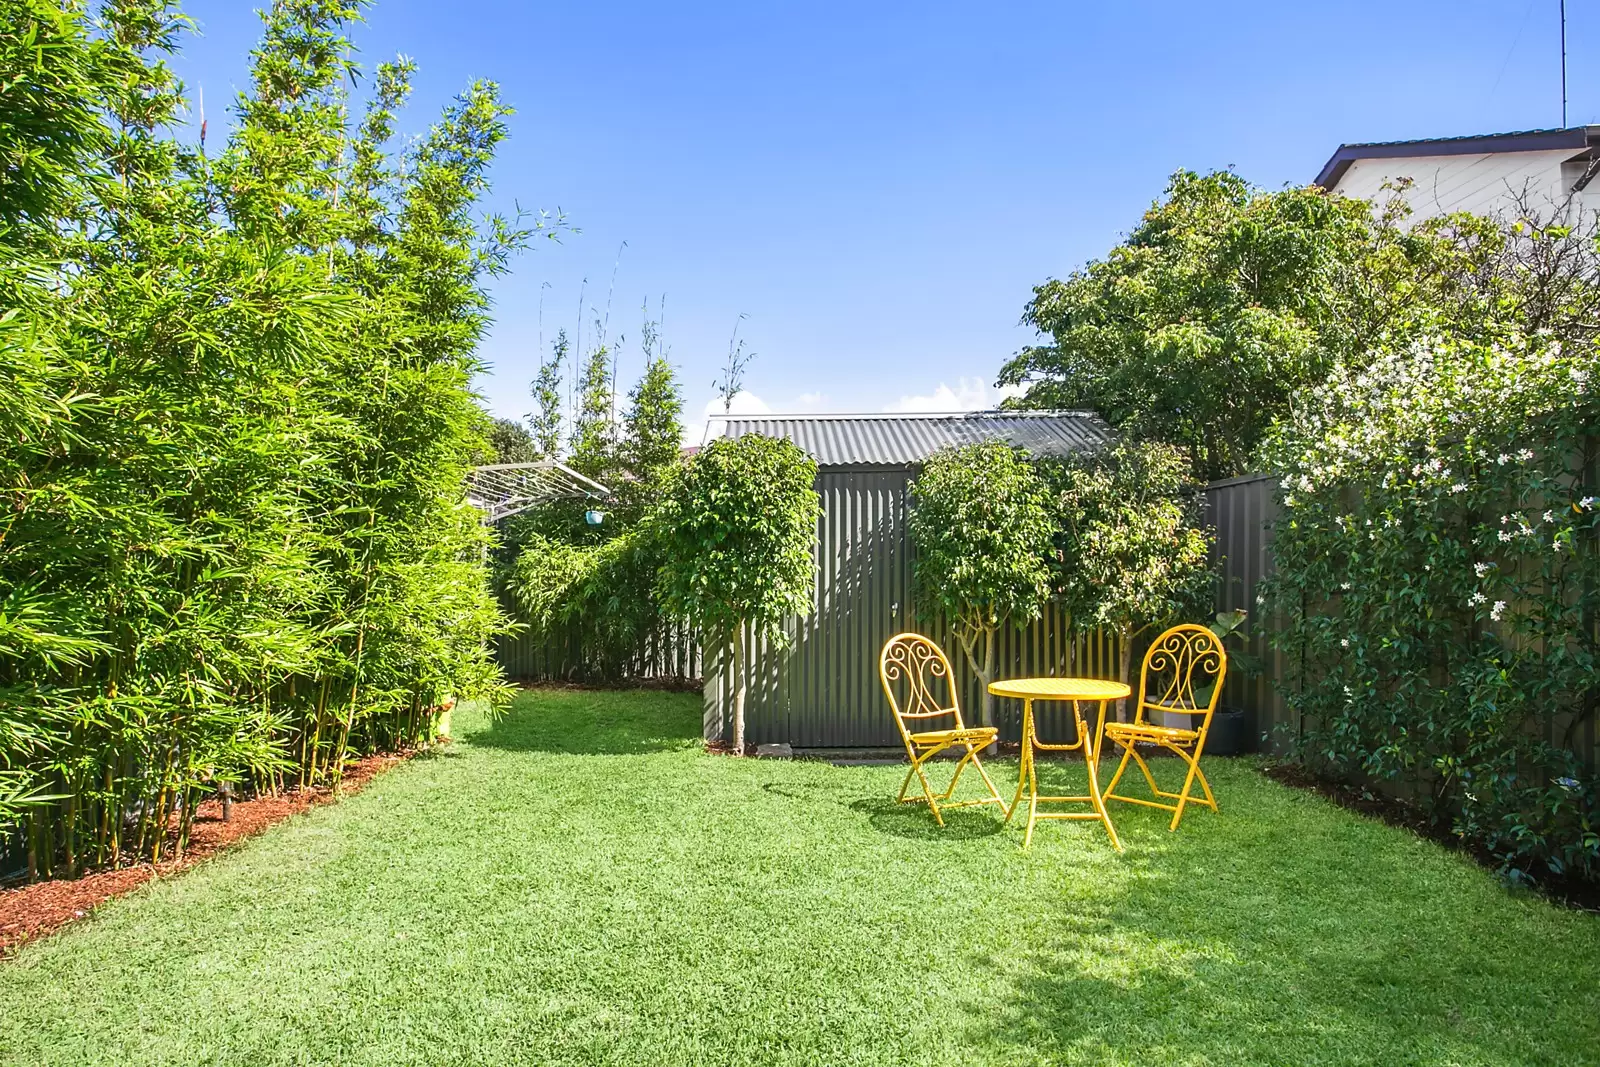 Photo #3: 608 Bunnerong Road, Matraville - Sold by Sydney Sotheby's International Realty